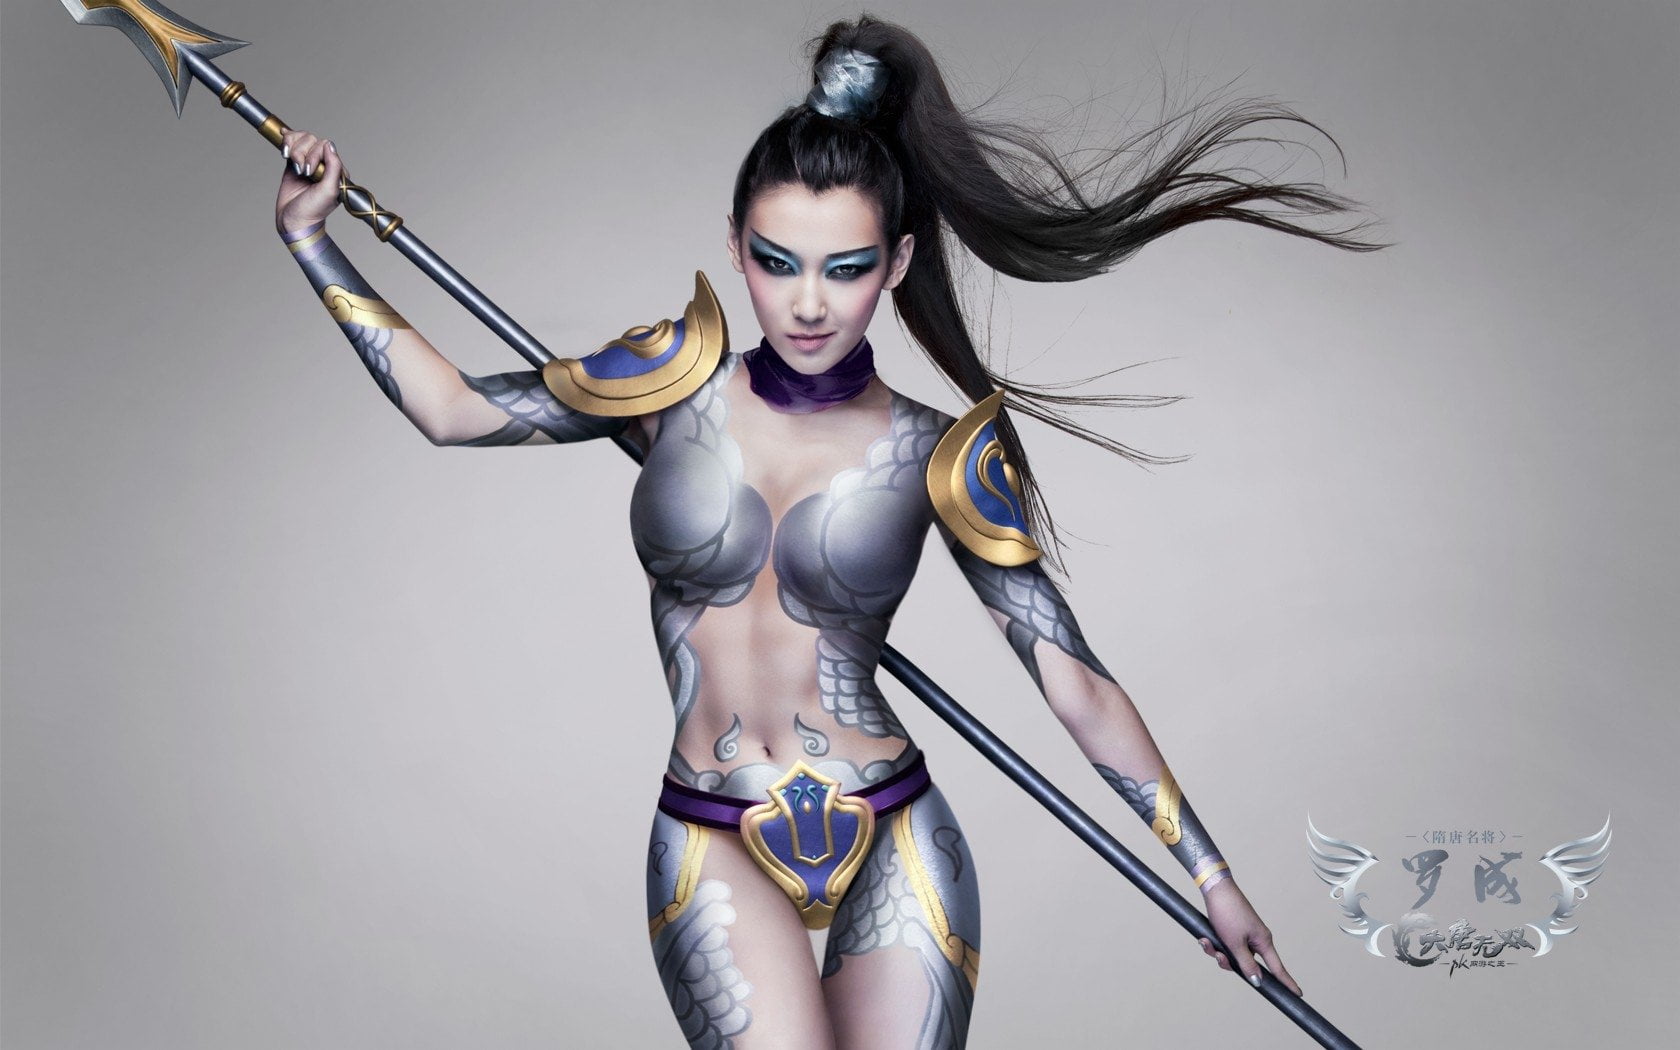 woman with spear game character graphic wallpaper, Women, Cosplay